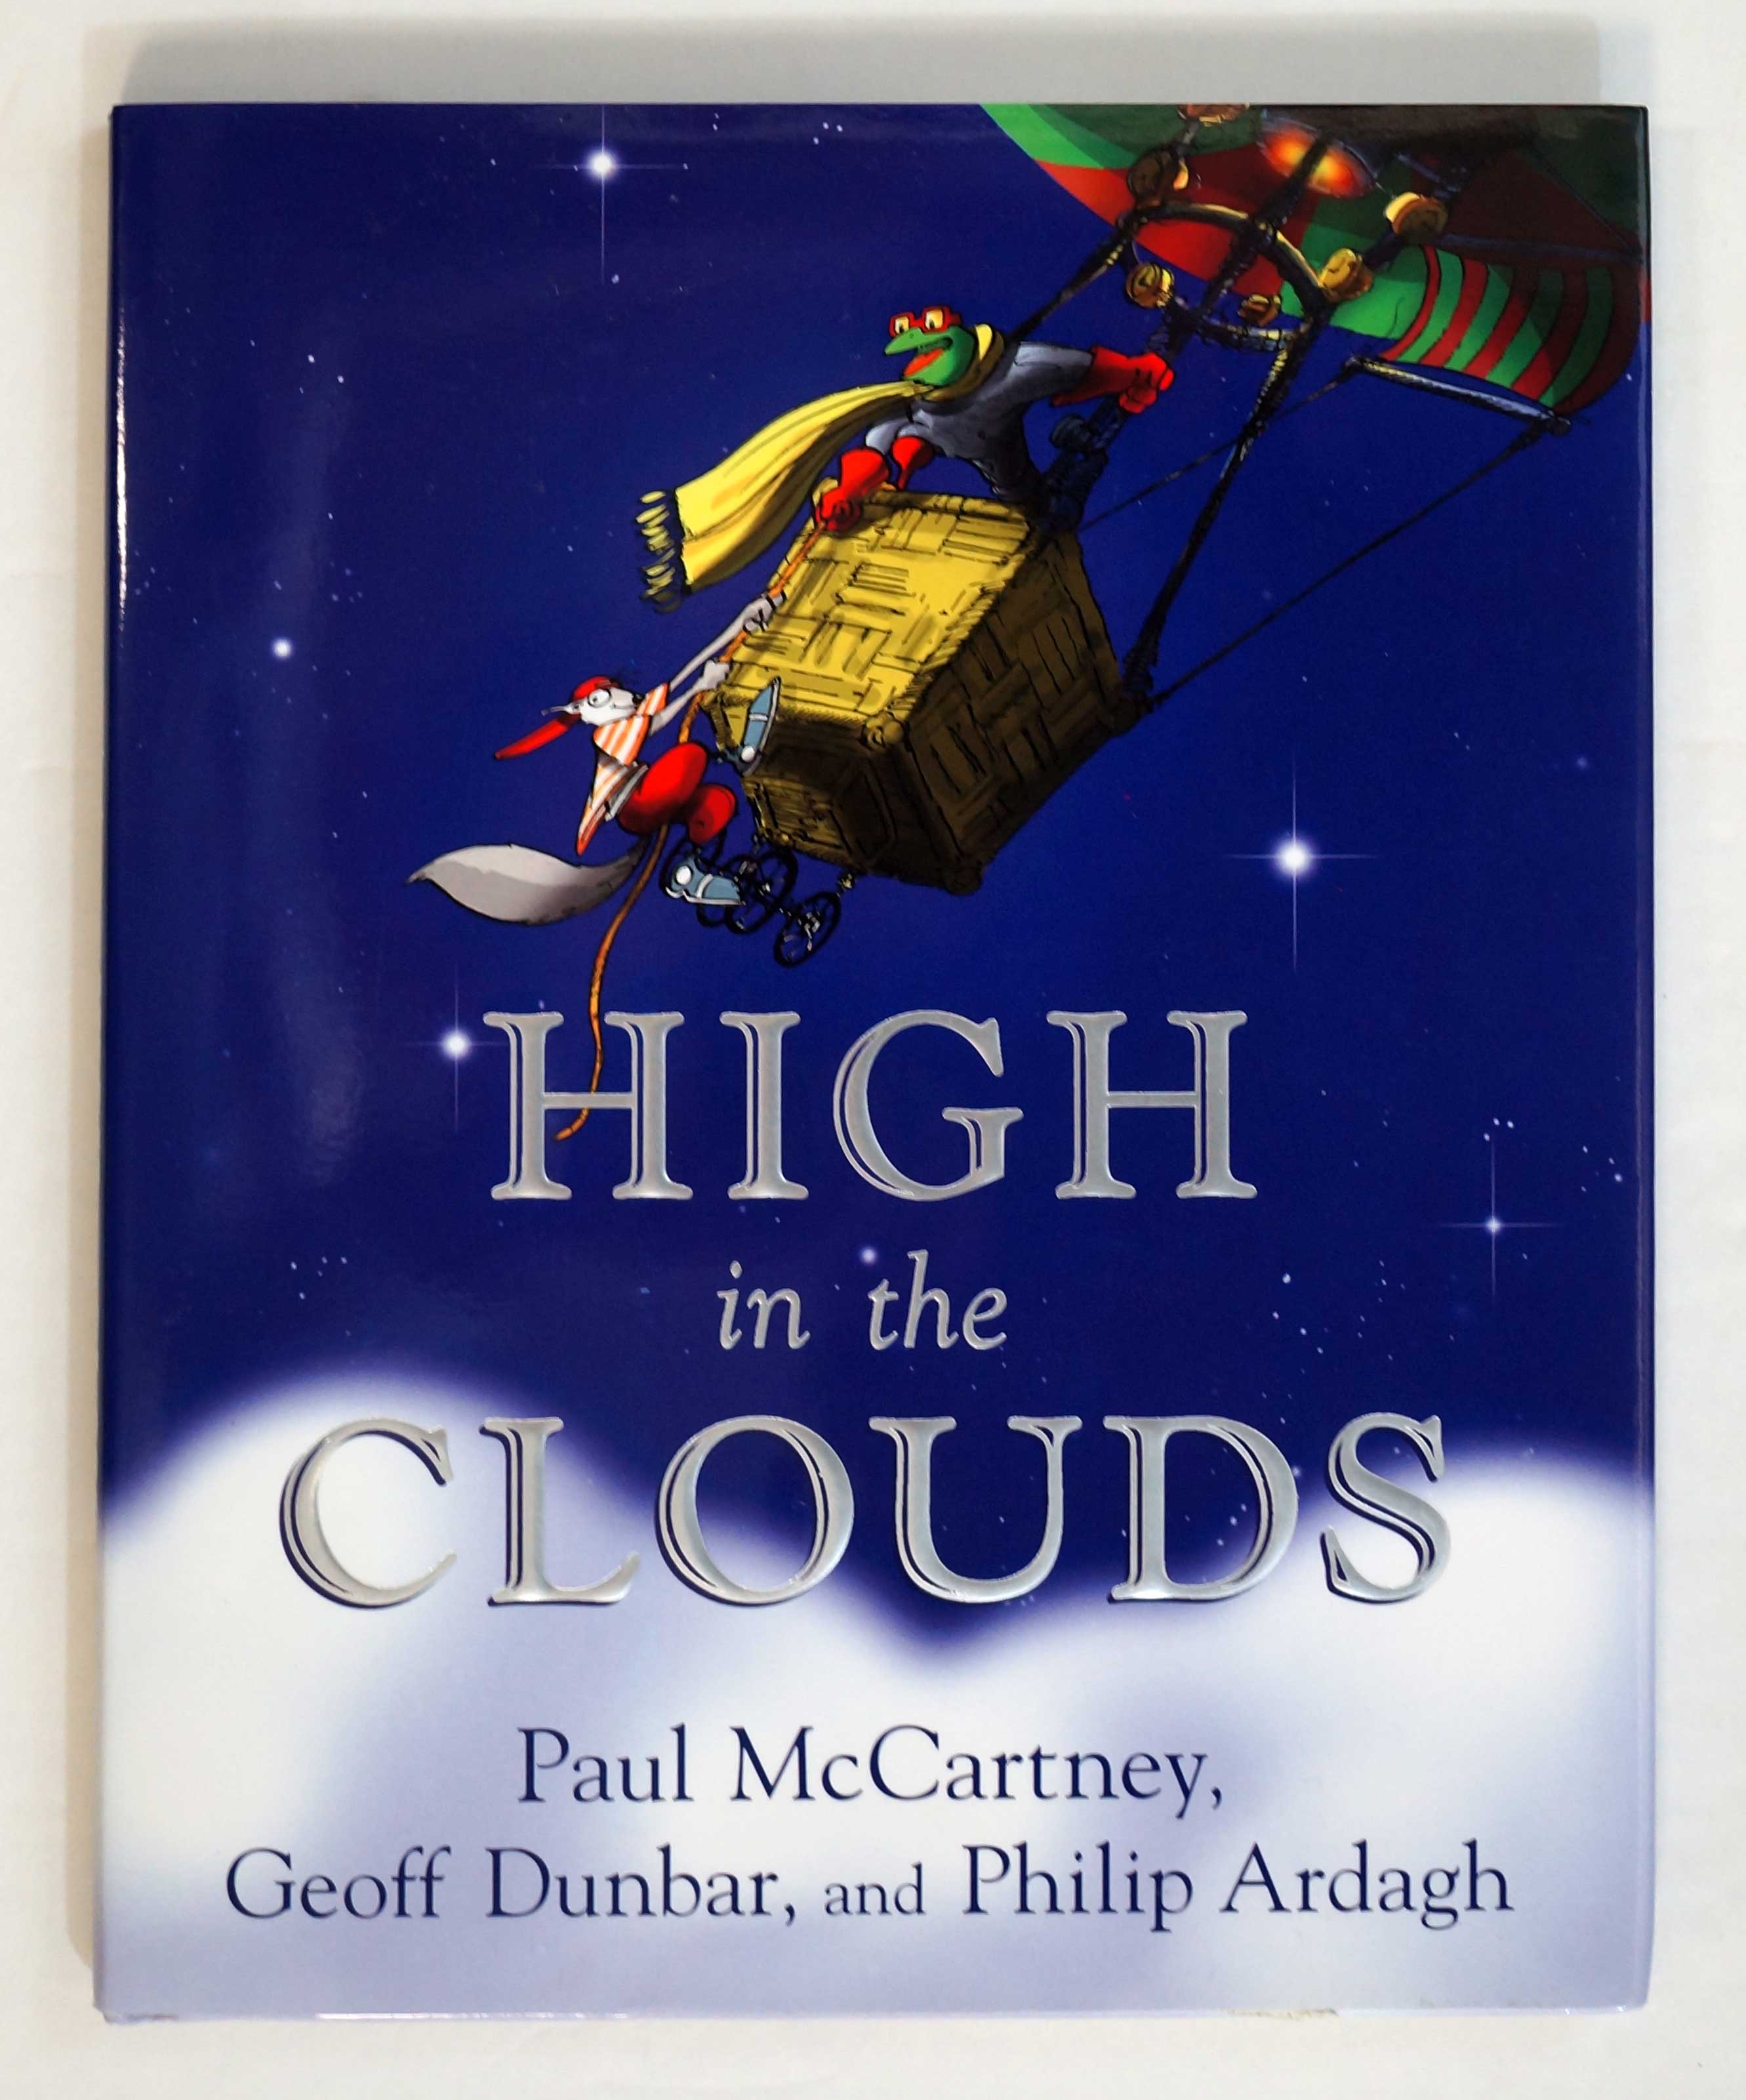 Lot 266 High in the Clouds Autographed by Paul McCartney